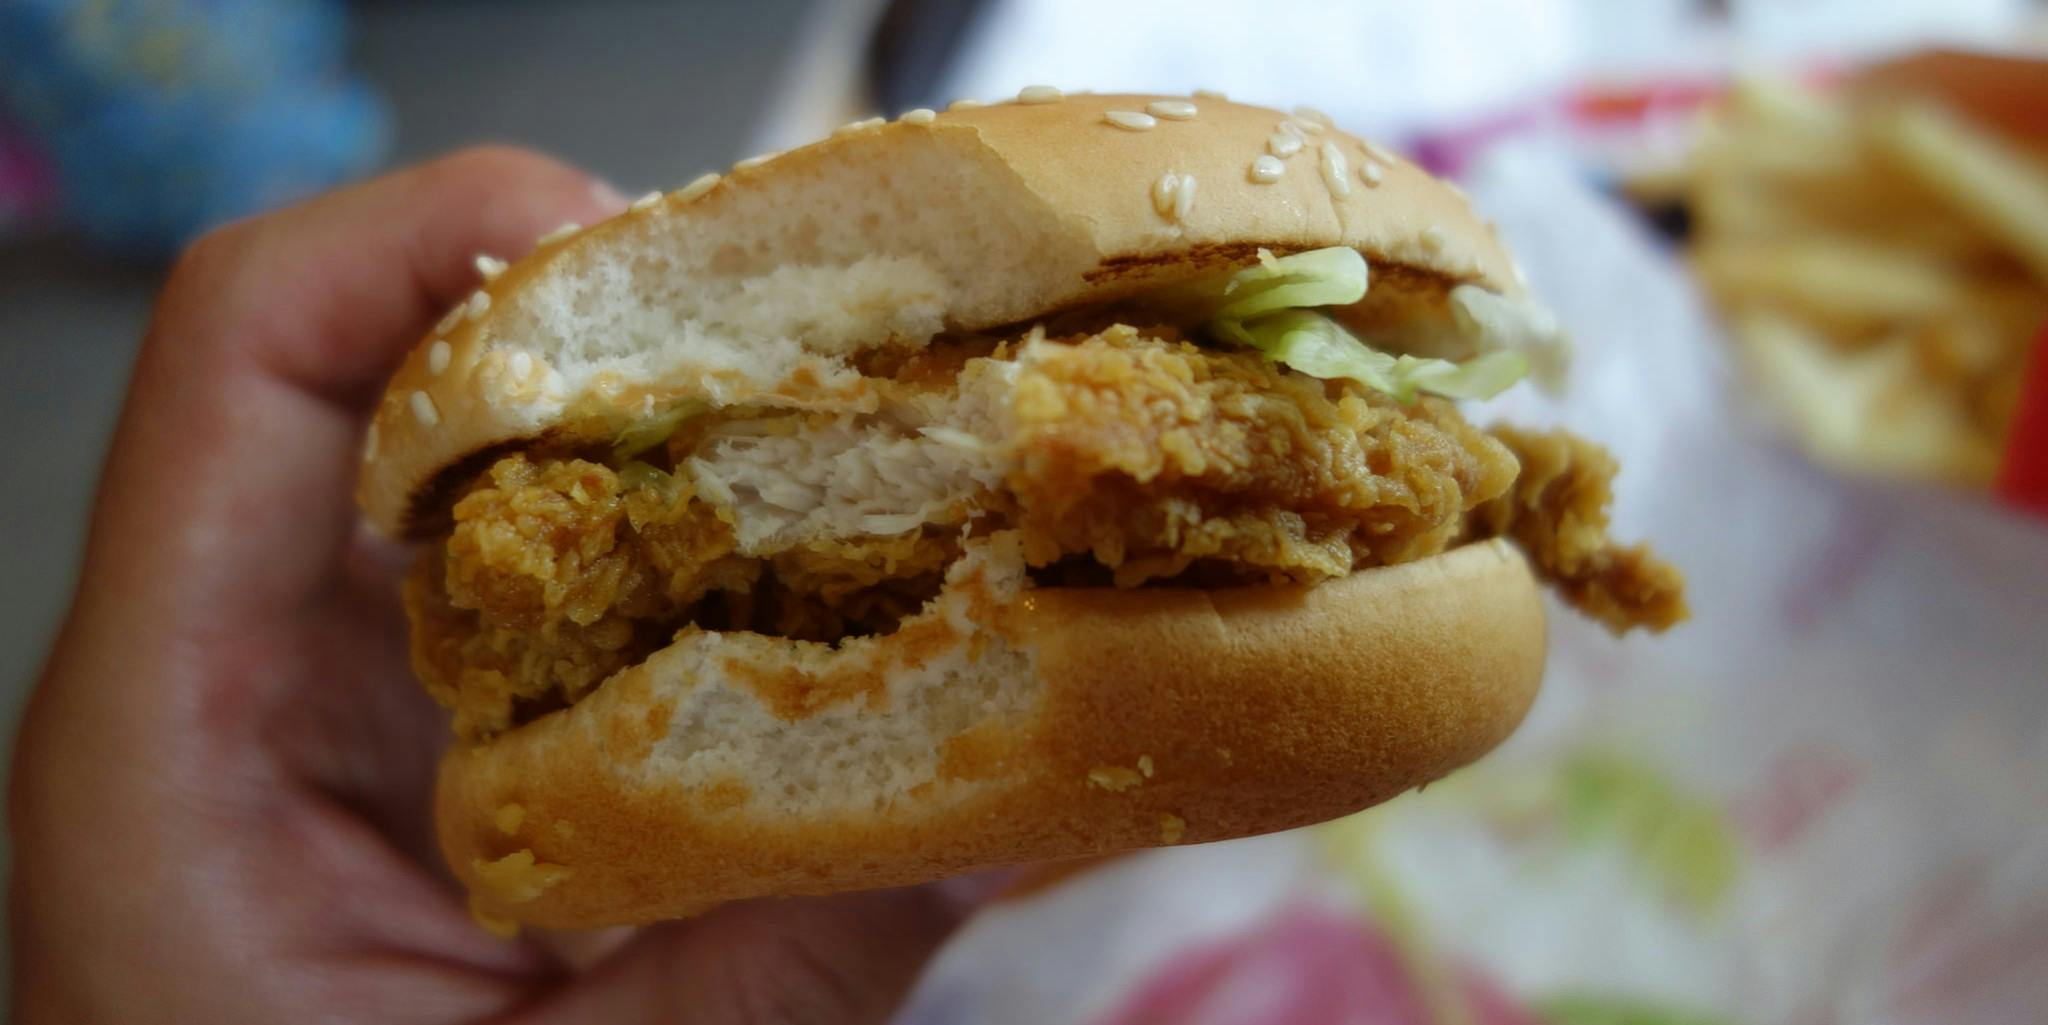 becky bloor recommends Guy Fucking A Mcchicken